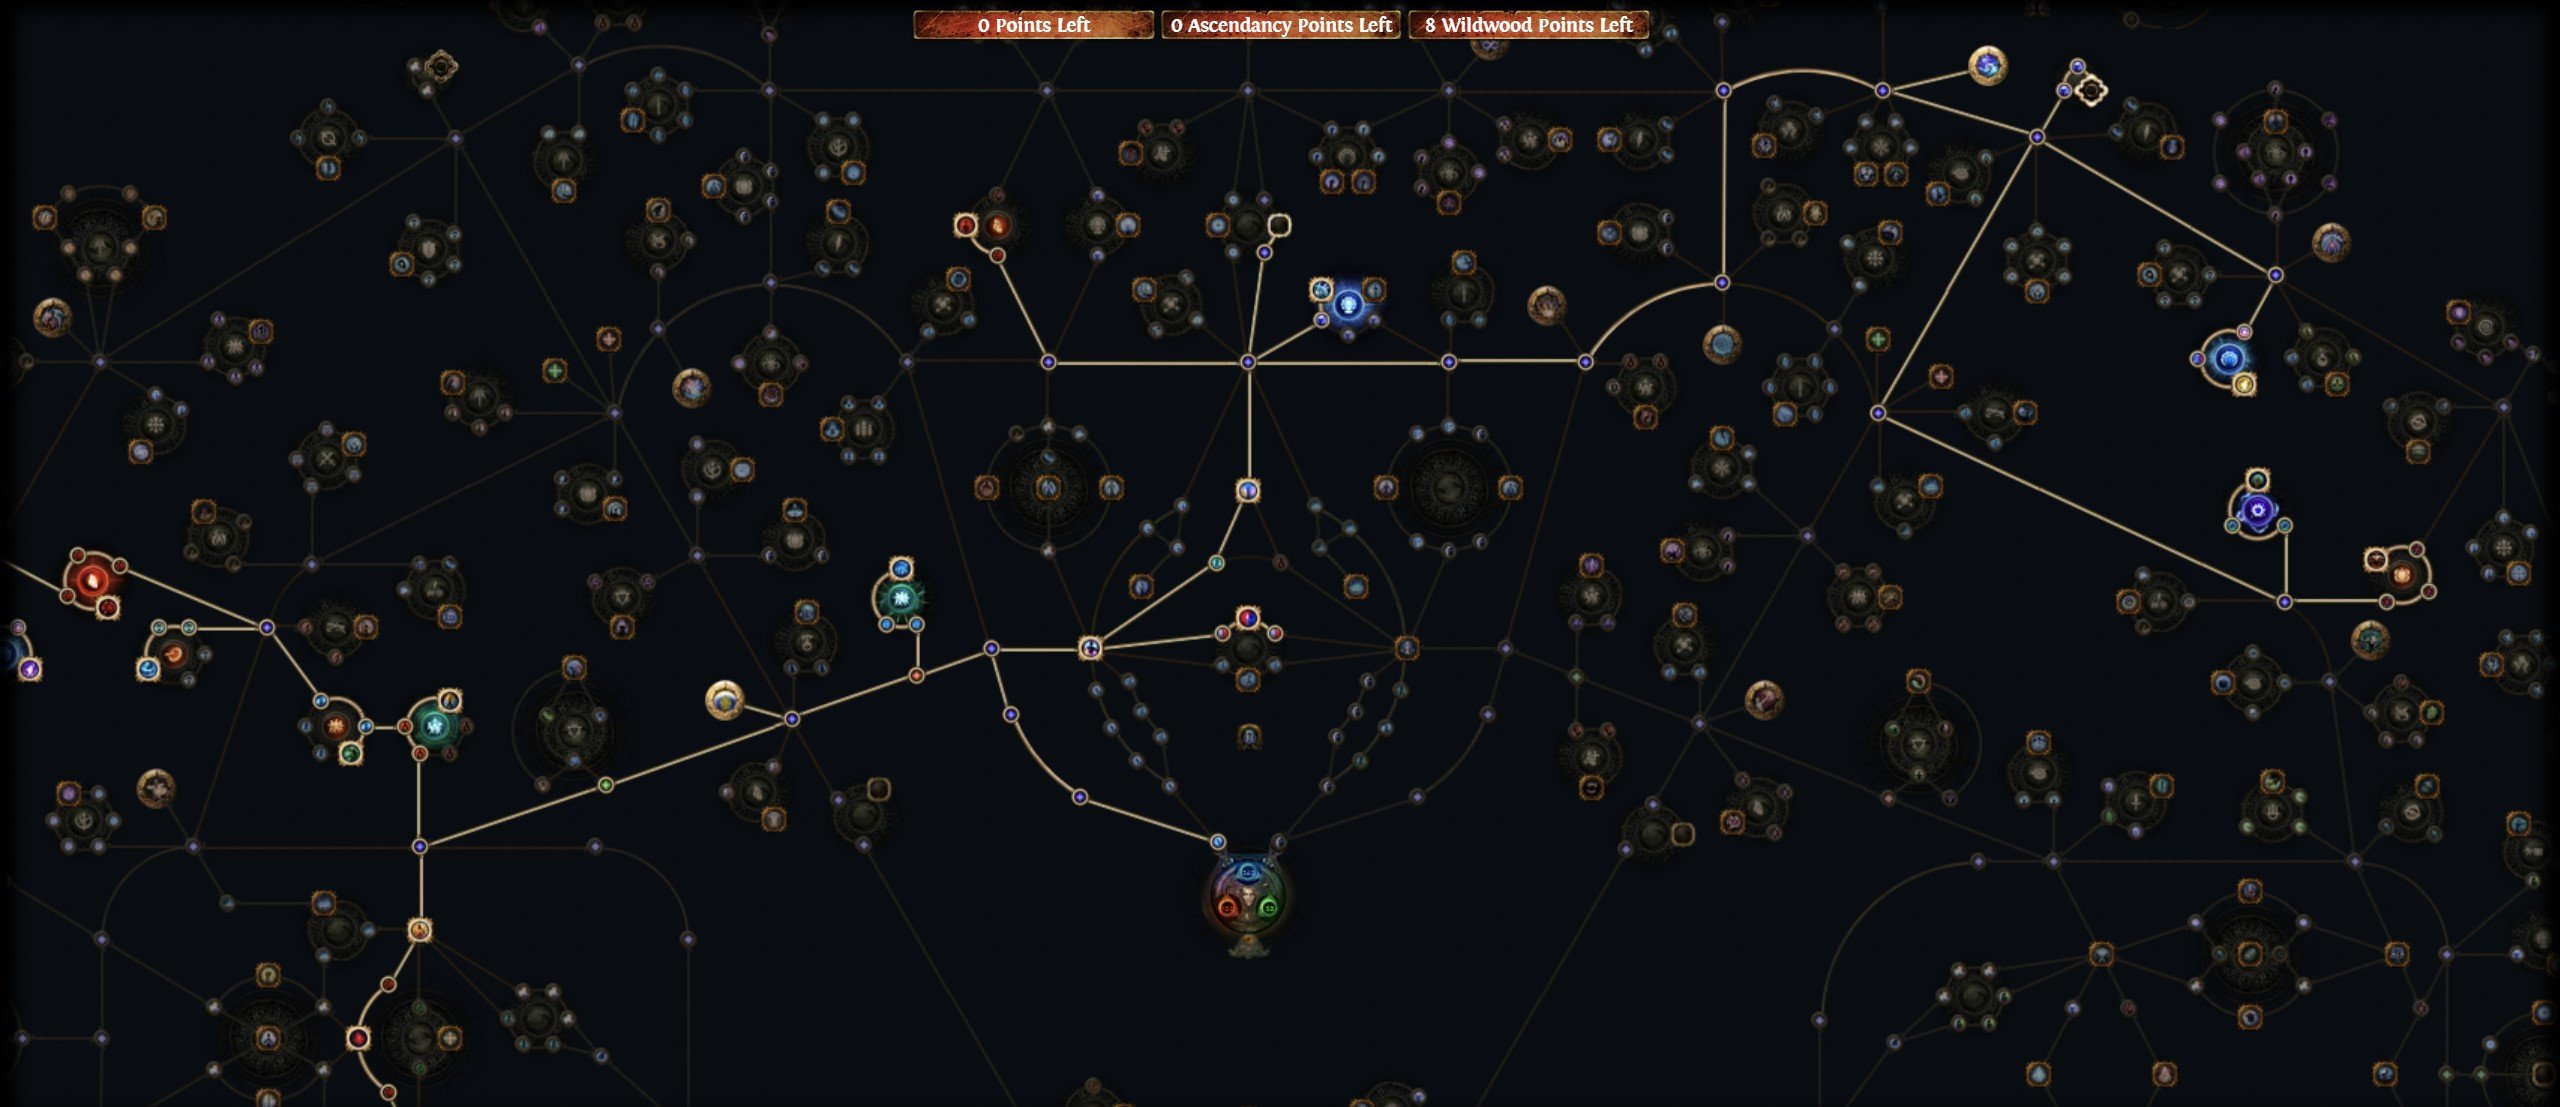 An image of the upper half of the Necromancer's preferred passive skills in Path of Exile.